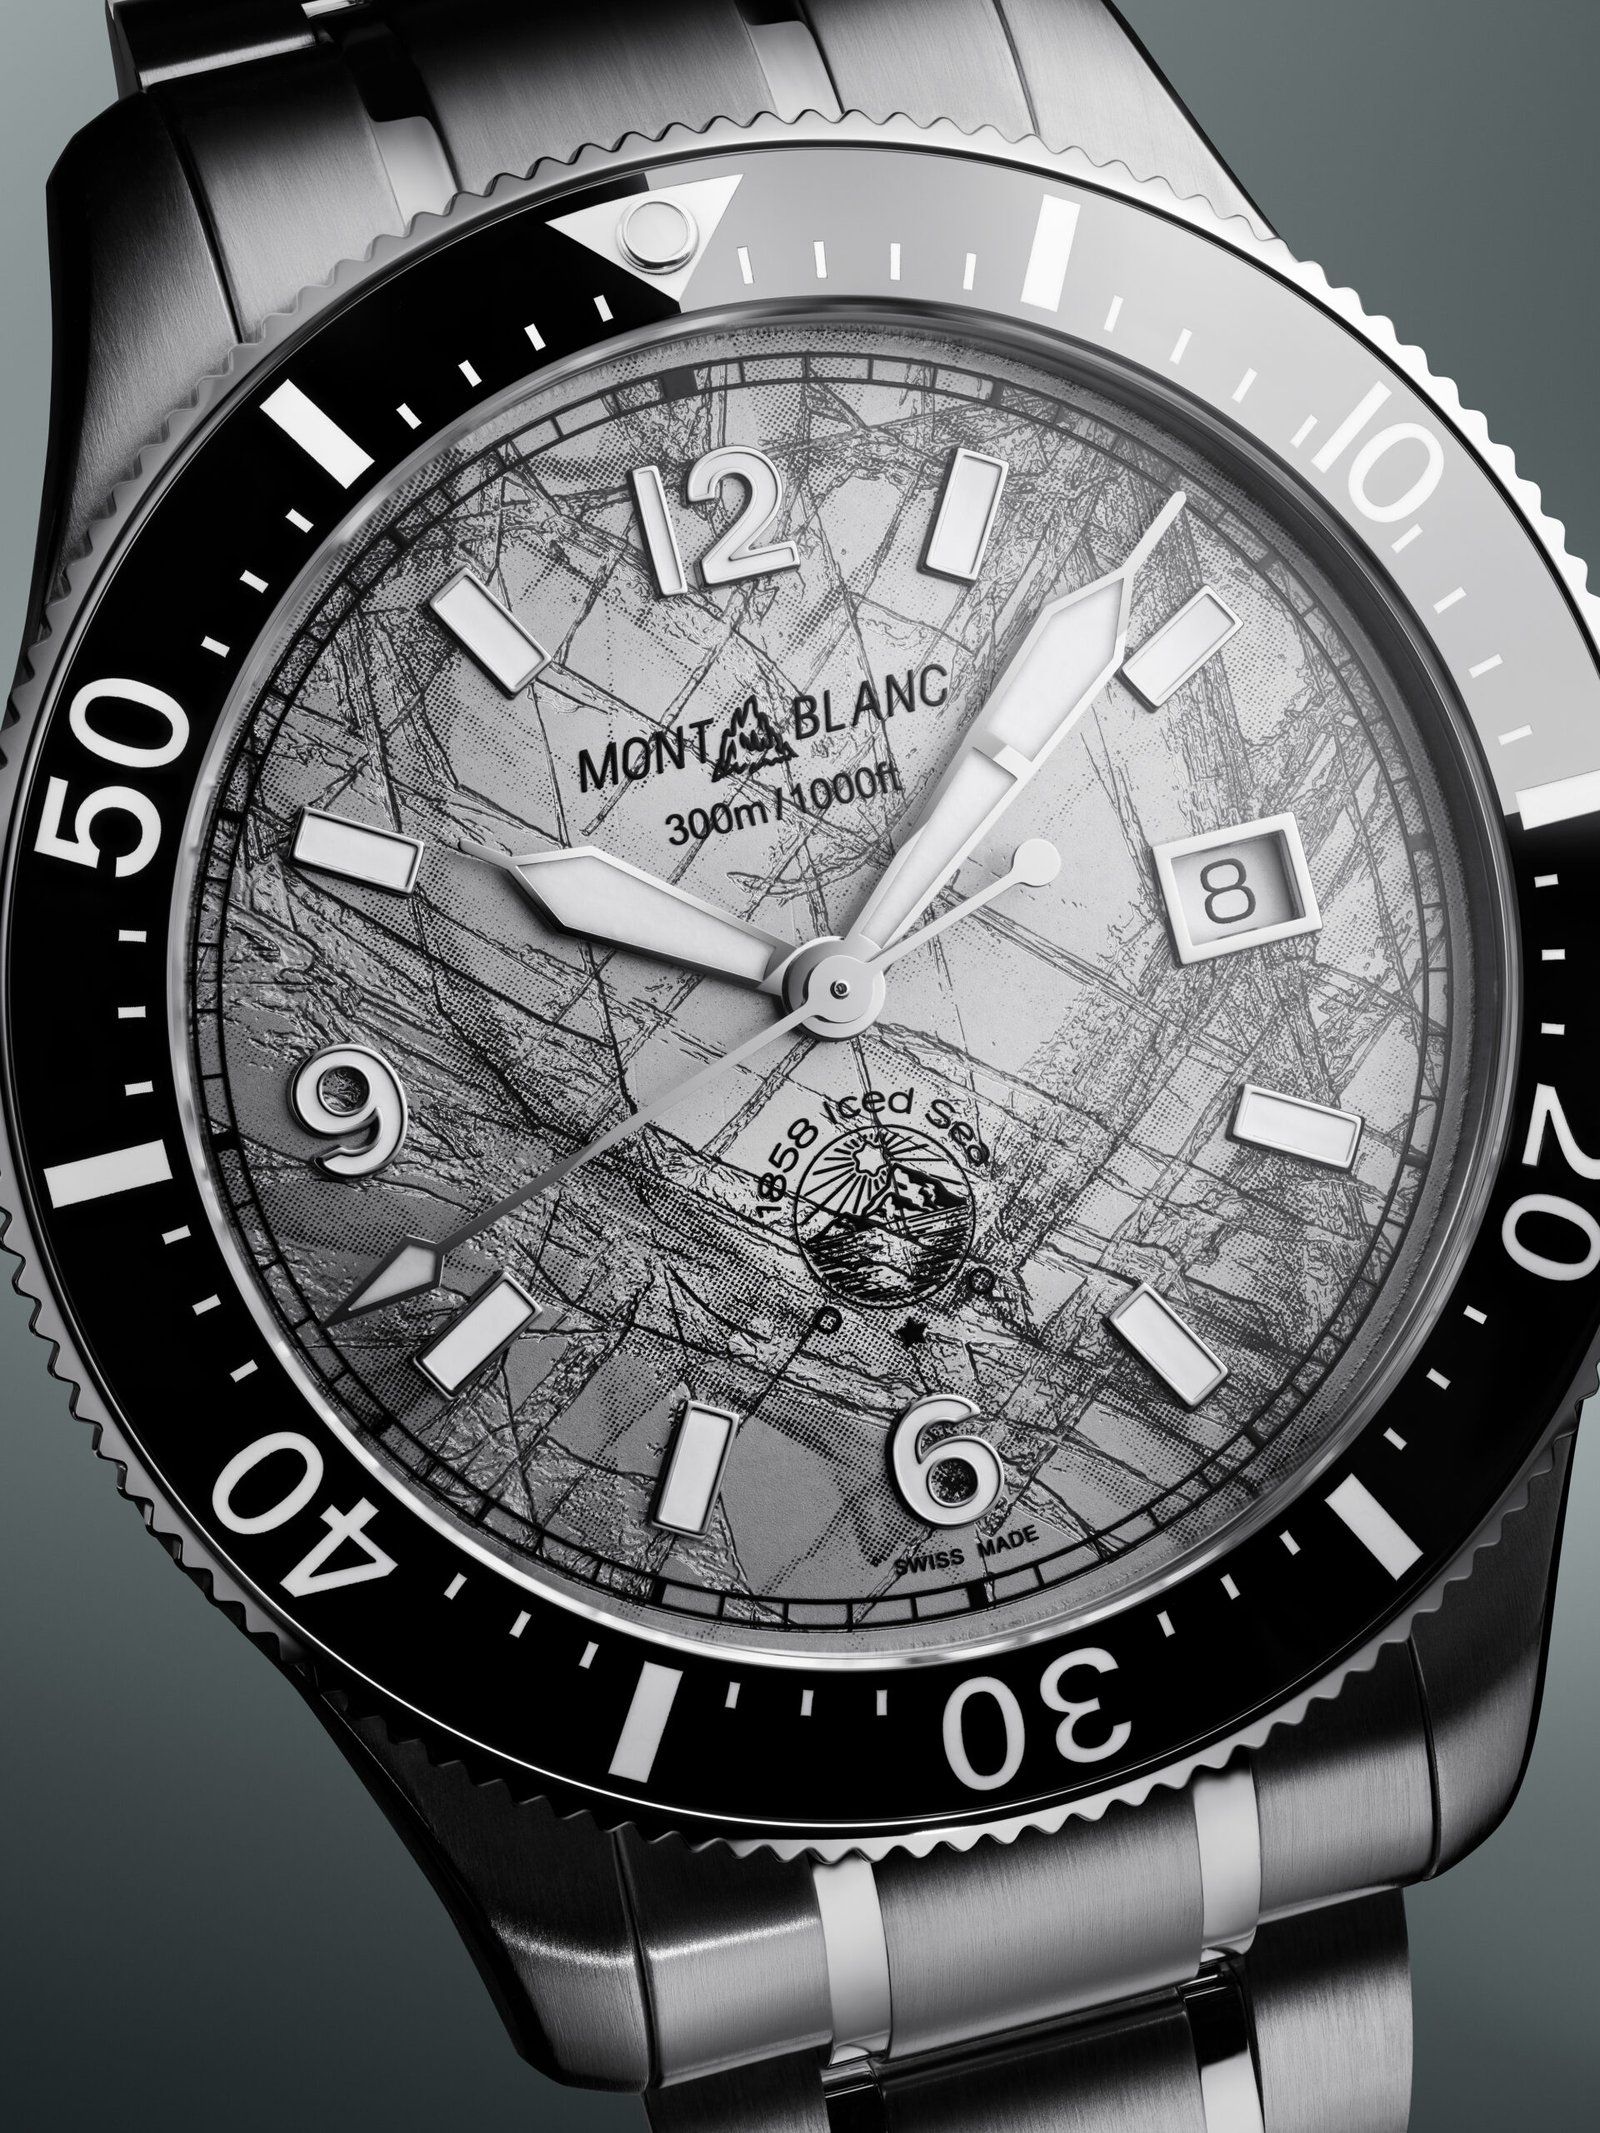 The Montblanc 1858 Iced Sea Automatic Date in grey features the first glacier dial in the watchmaking industry